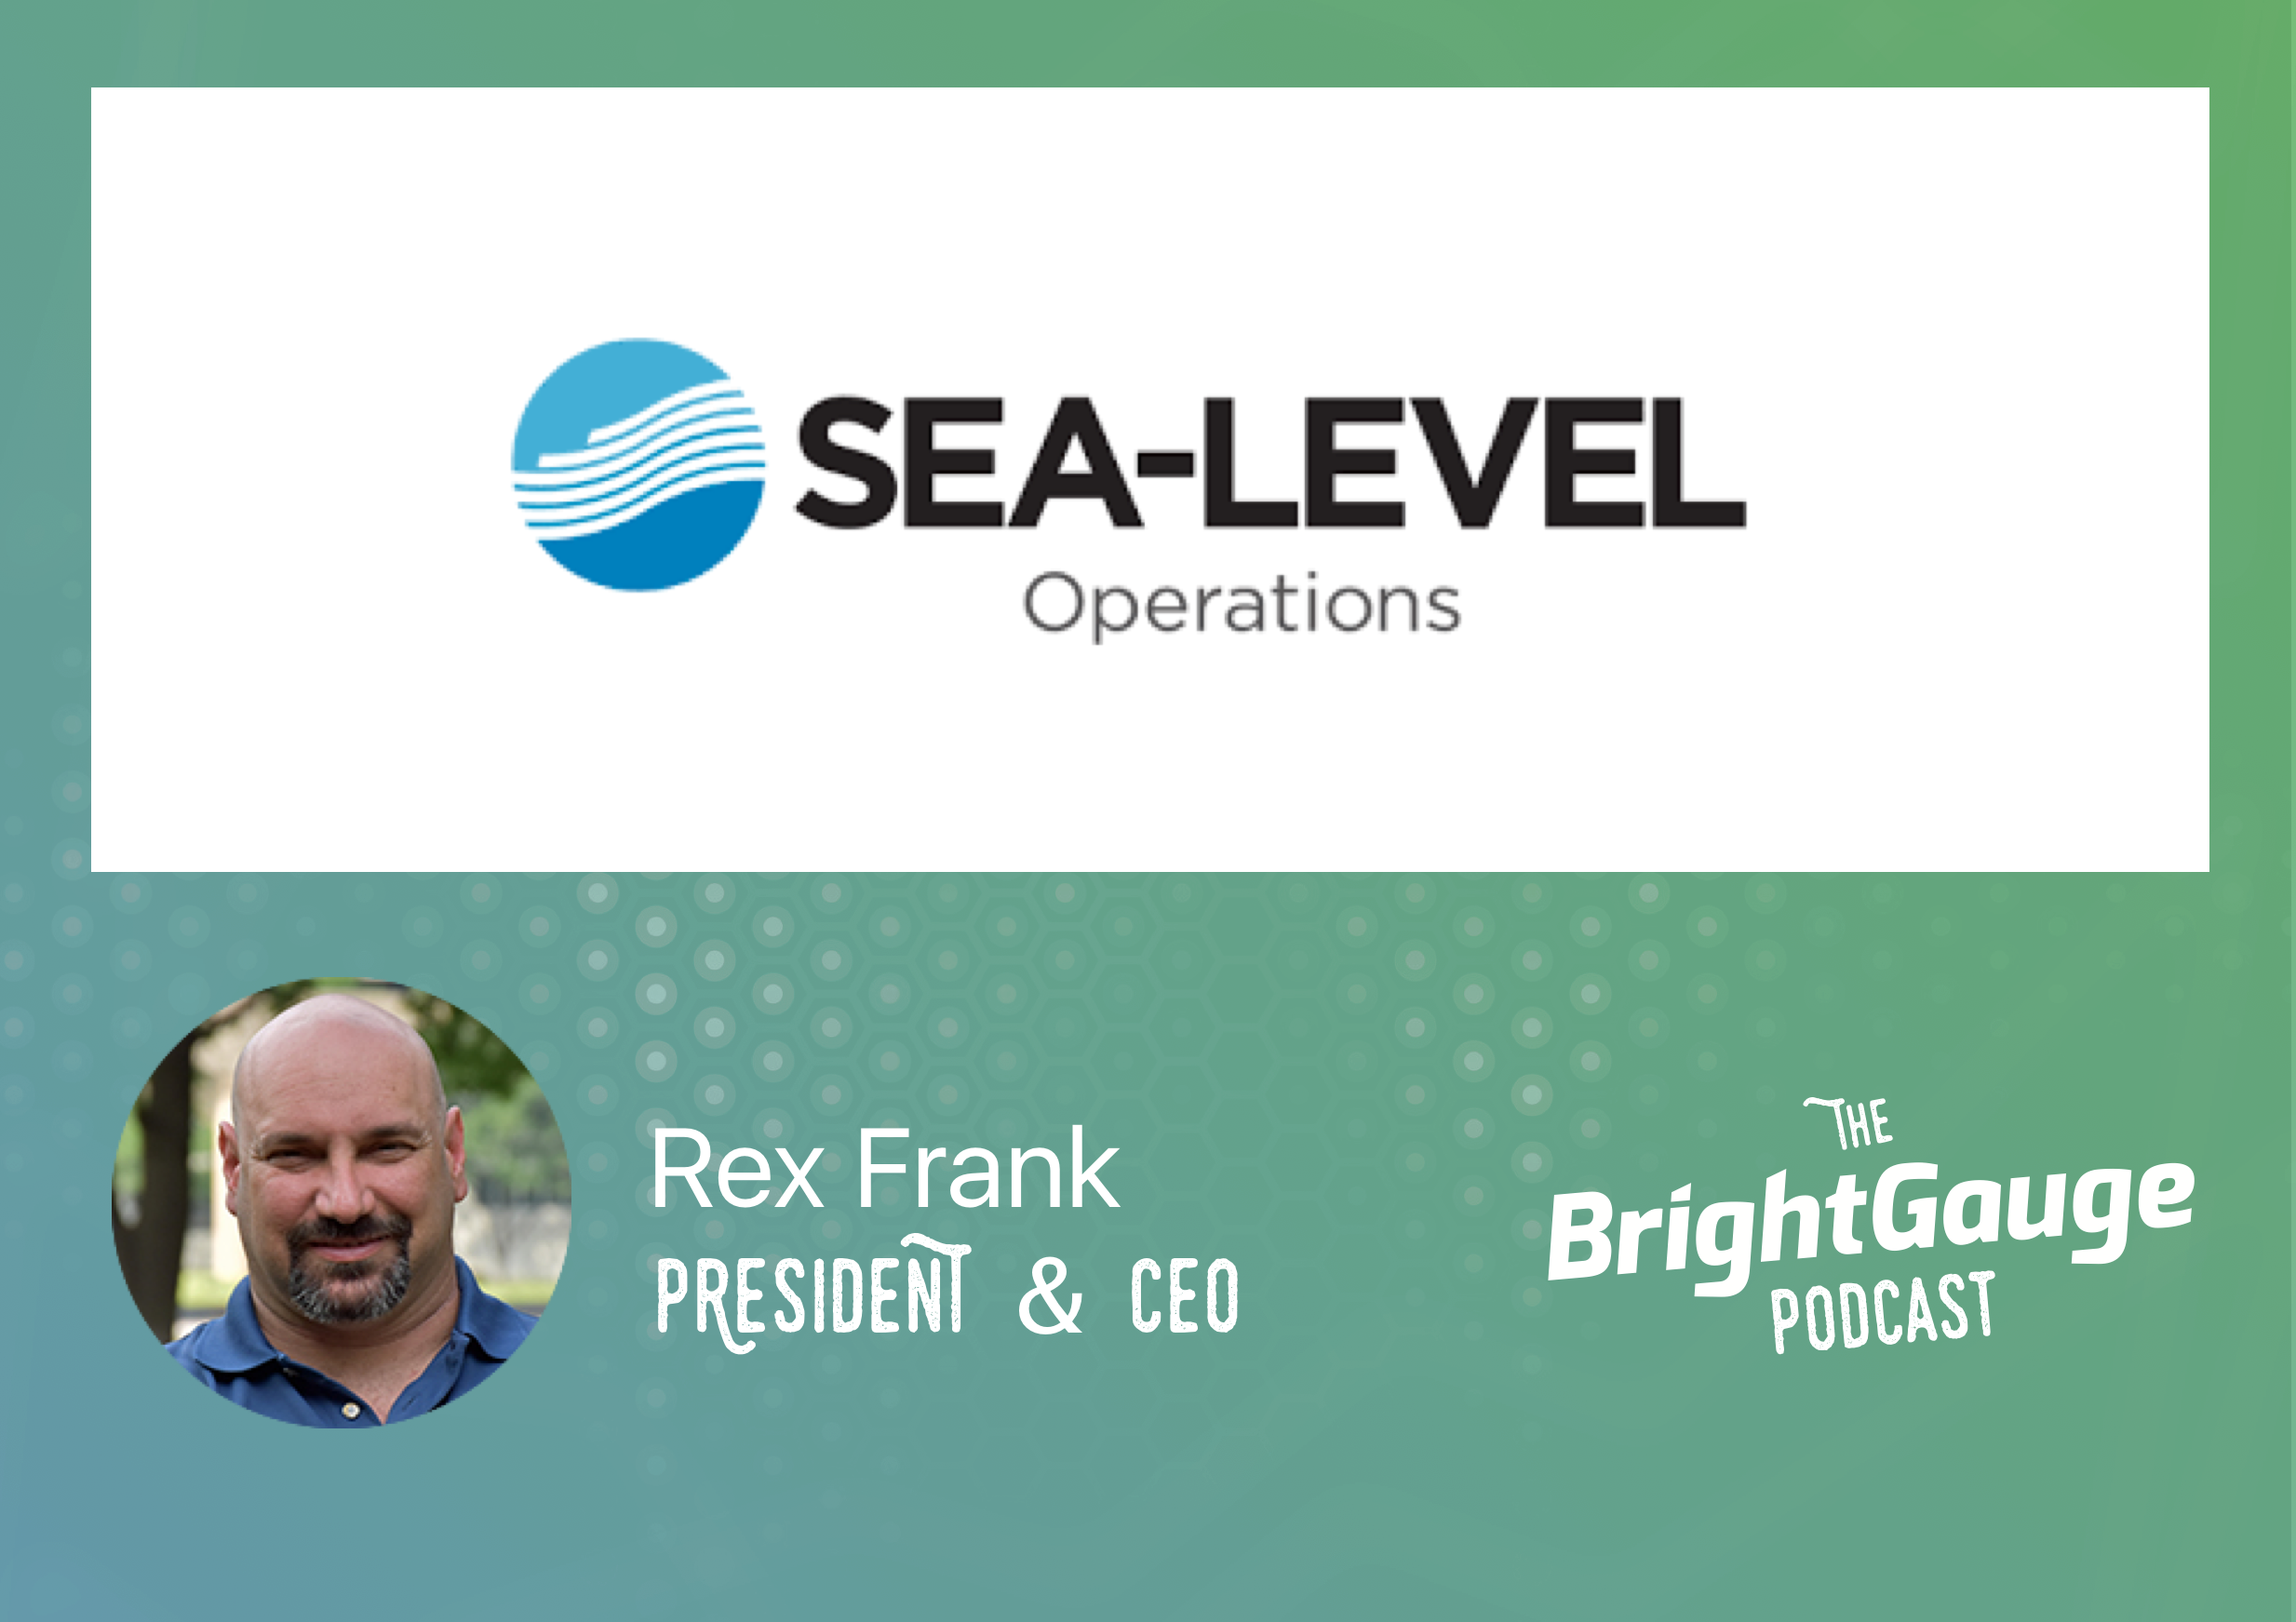 [Podcast] Episode 27 with Rex Frank of Sea Level Operations